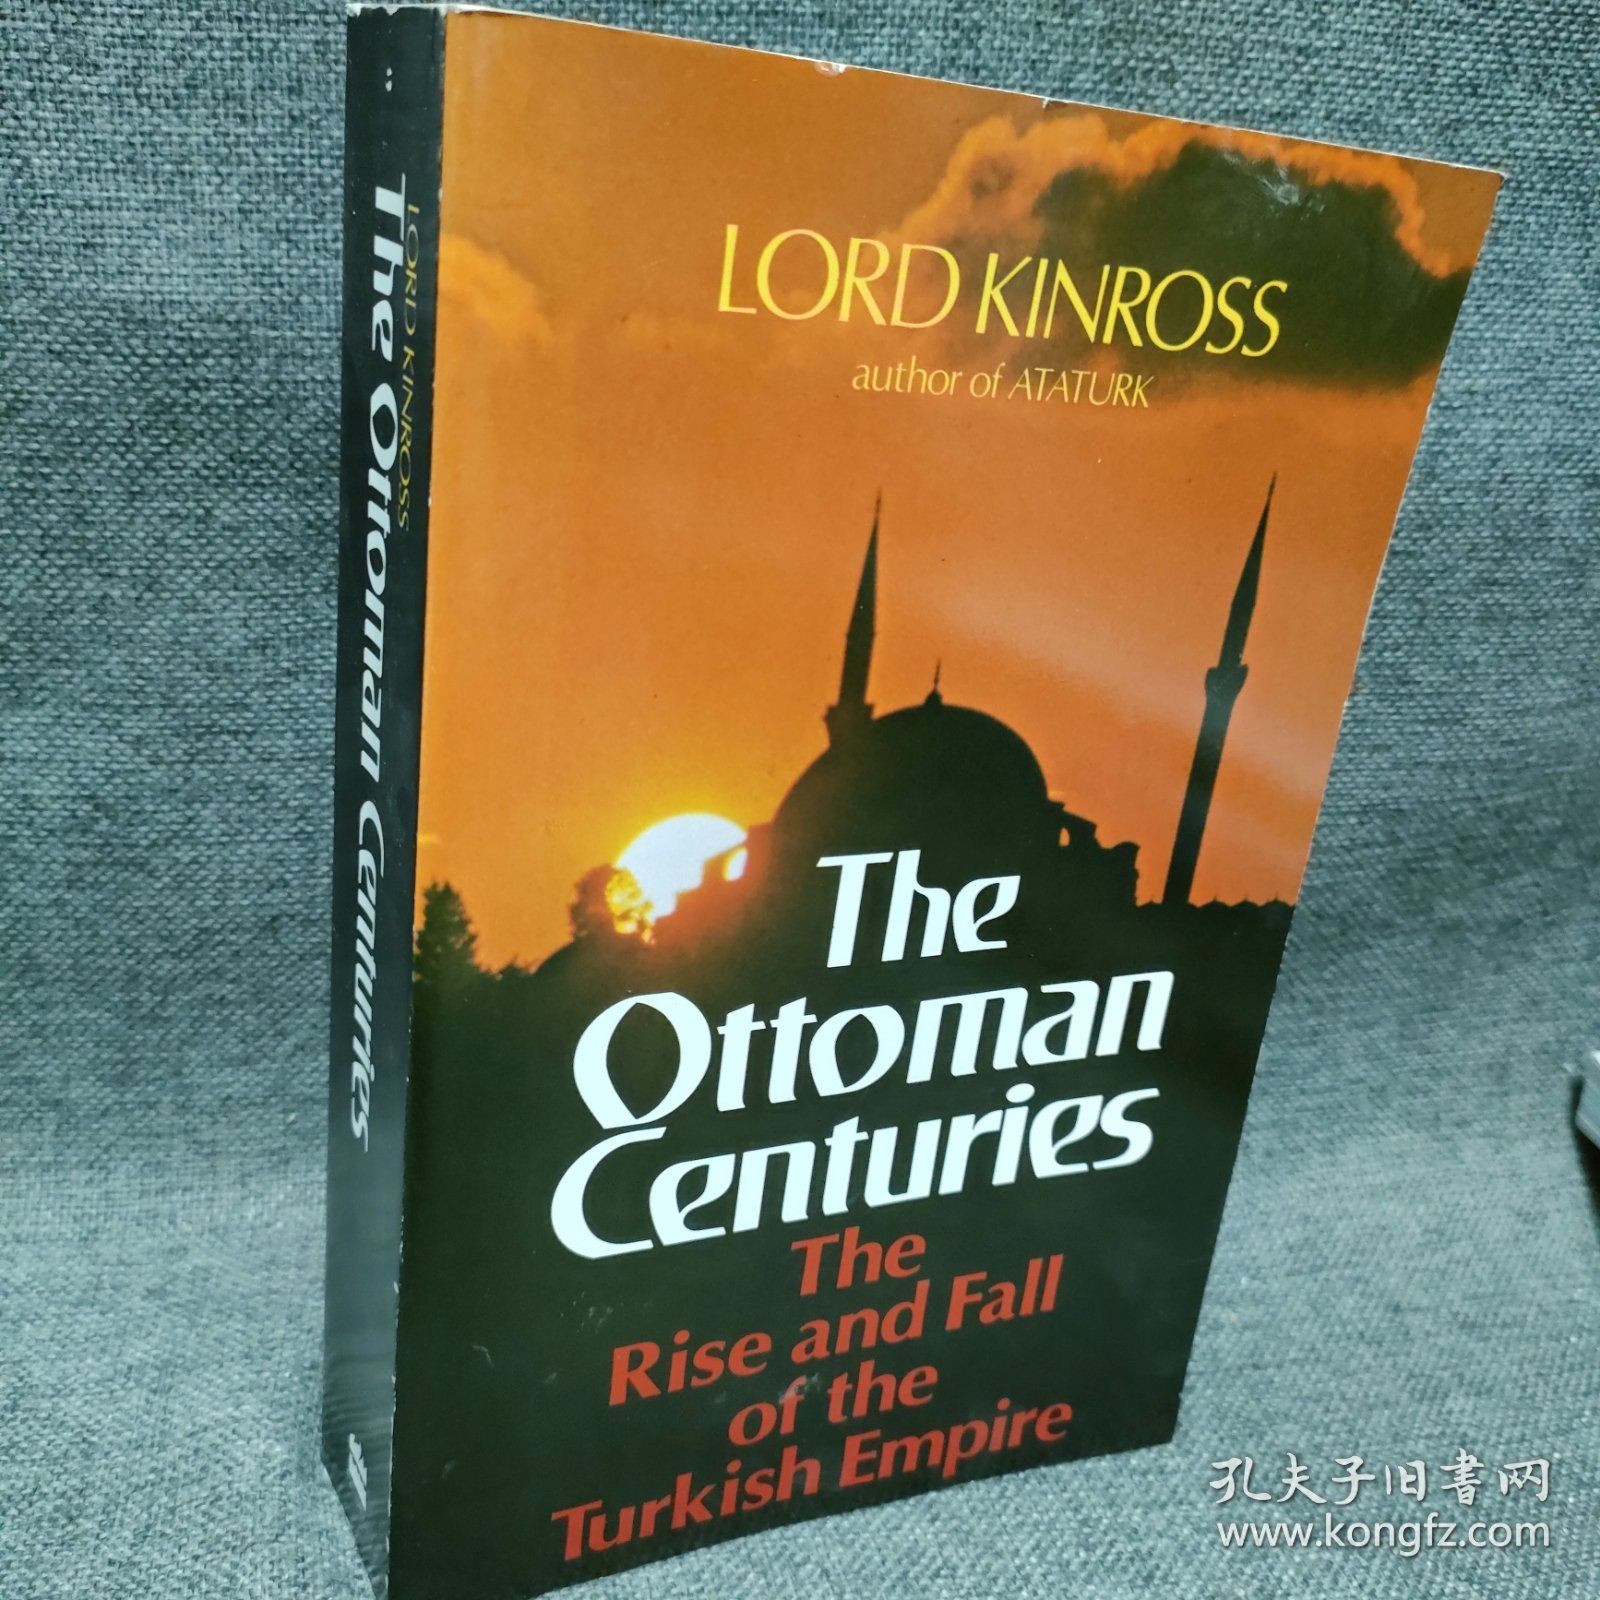 The Ottoman Centuries -- The rise and fall of the Turkish Empire by Lord Kinross